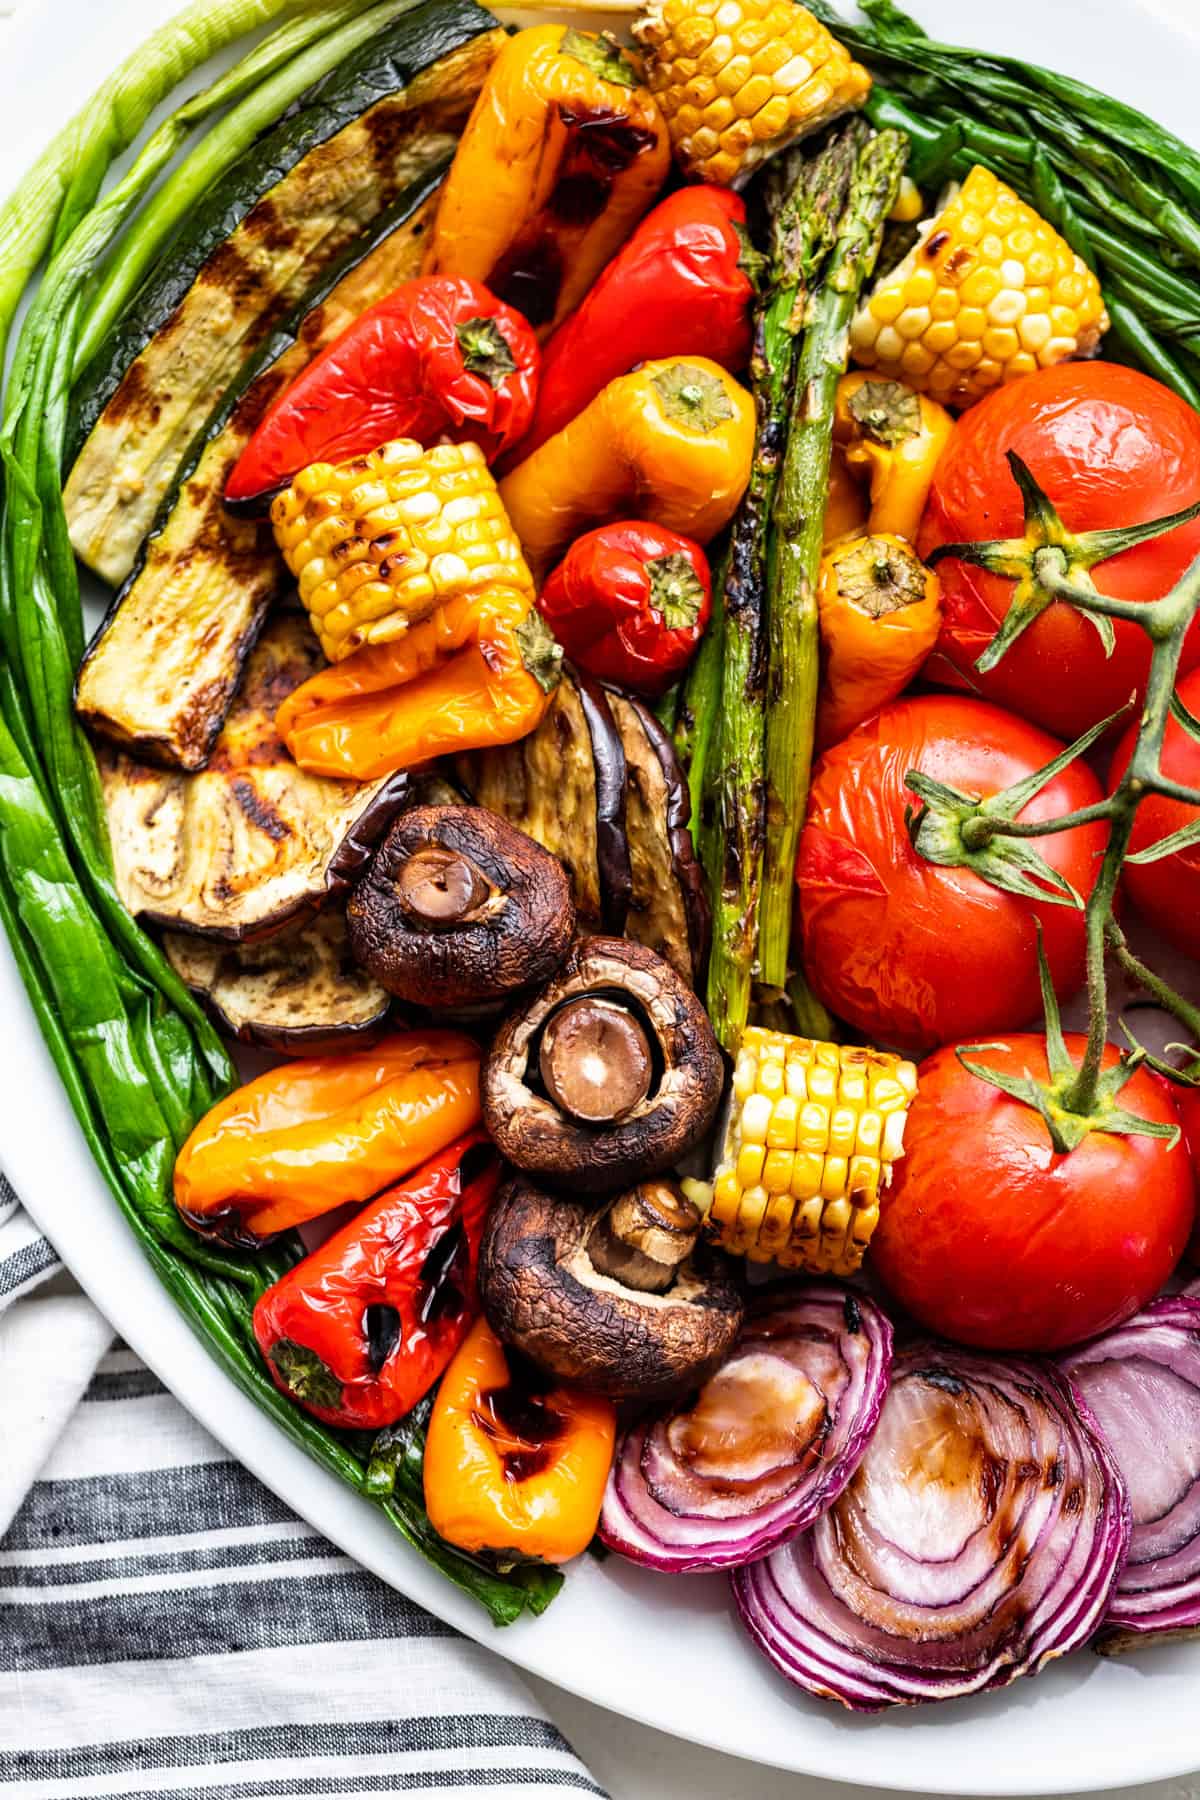 Lots of grilled veggies on a white platter, corn on the cob, tomatoes, mushrooms, sliced red onions, gypsy sweet peppers, zucchini, and asparagus.